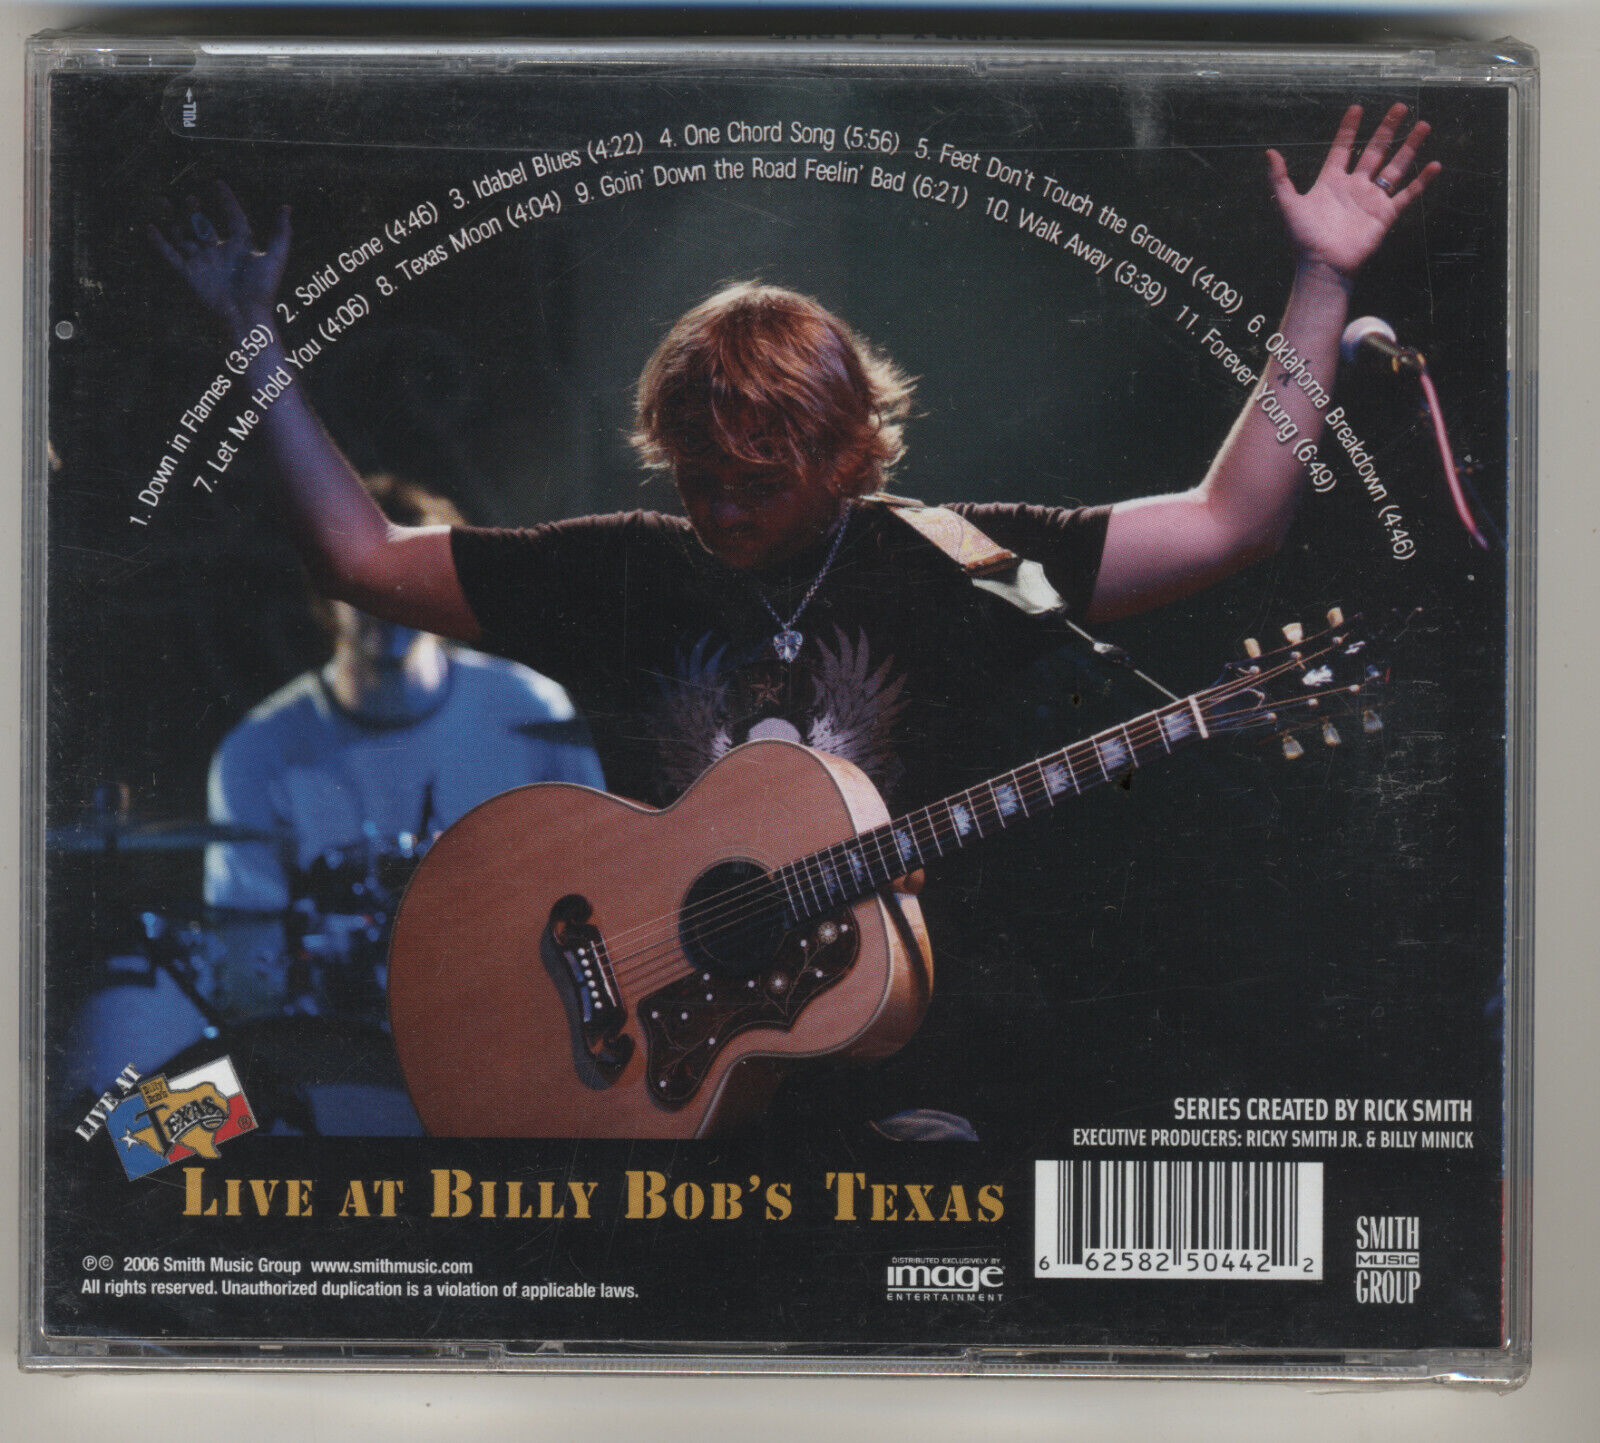 Stoney LaRue - Live At Billy Bob's Texas - Limited Edition CD+DVD - New ...